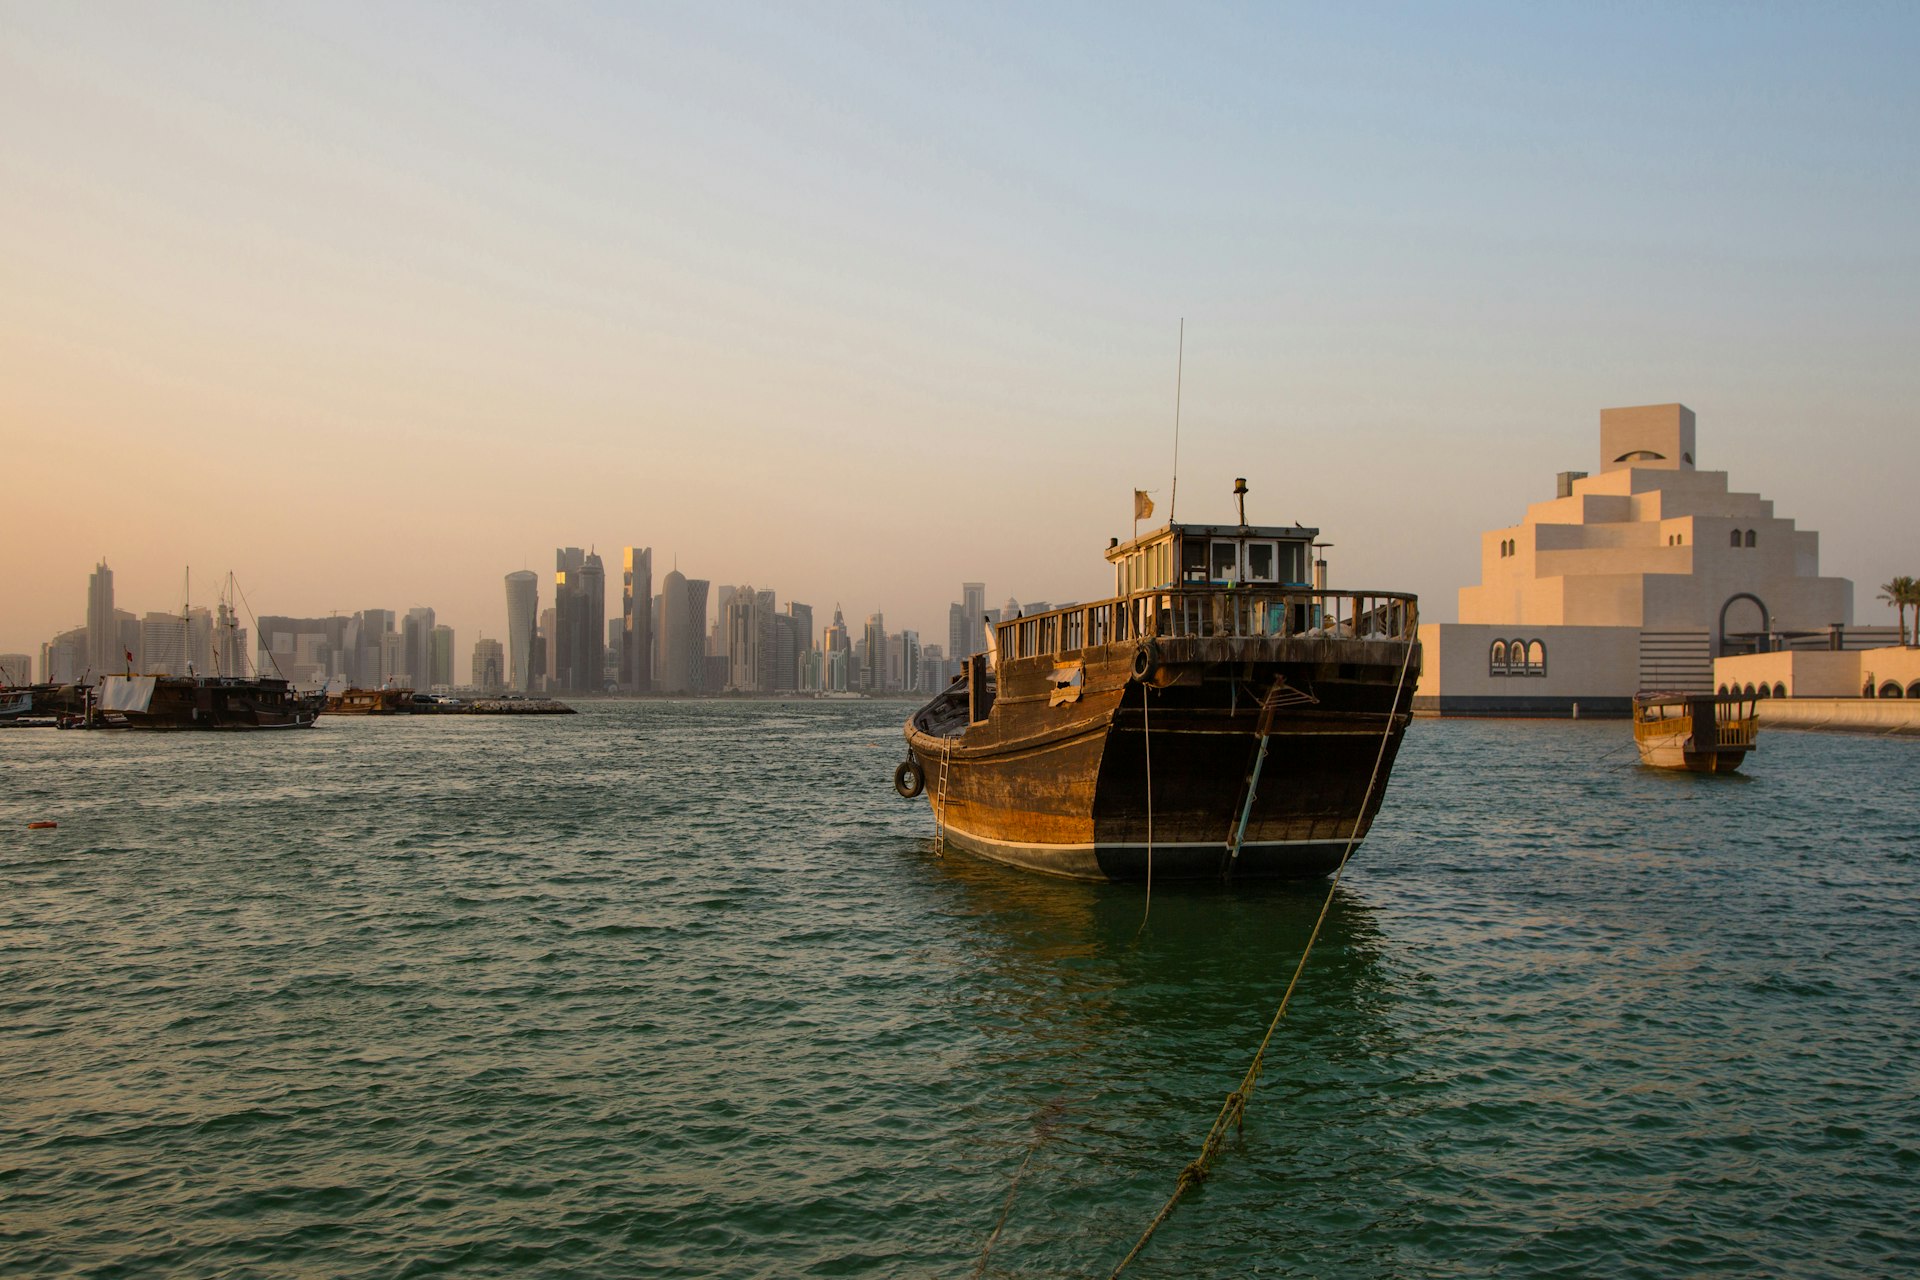 A traditional dhow in Doha, Qatar © Artie Photography (Artie Ng) / Getty Images